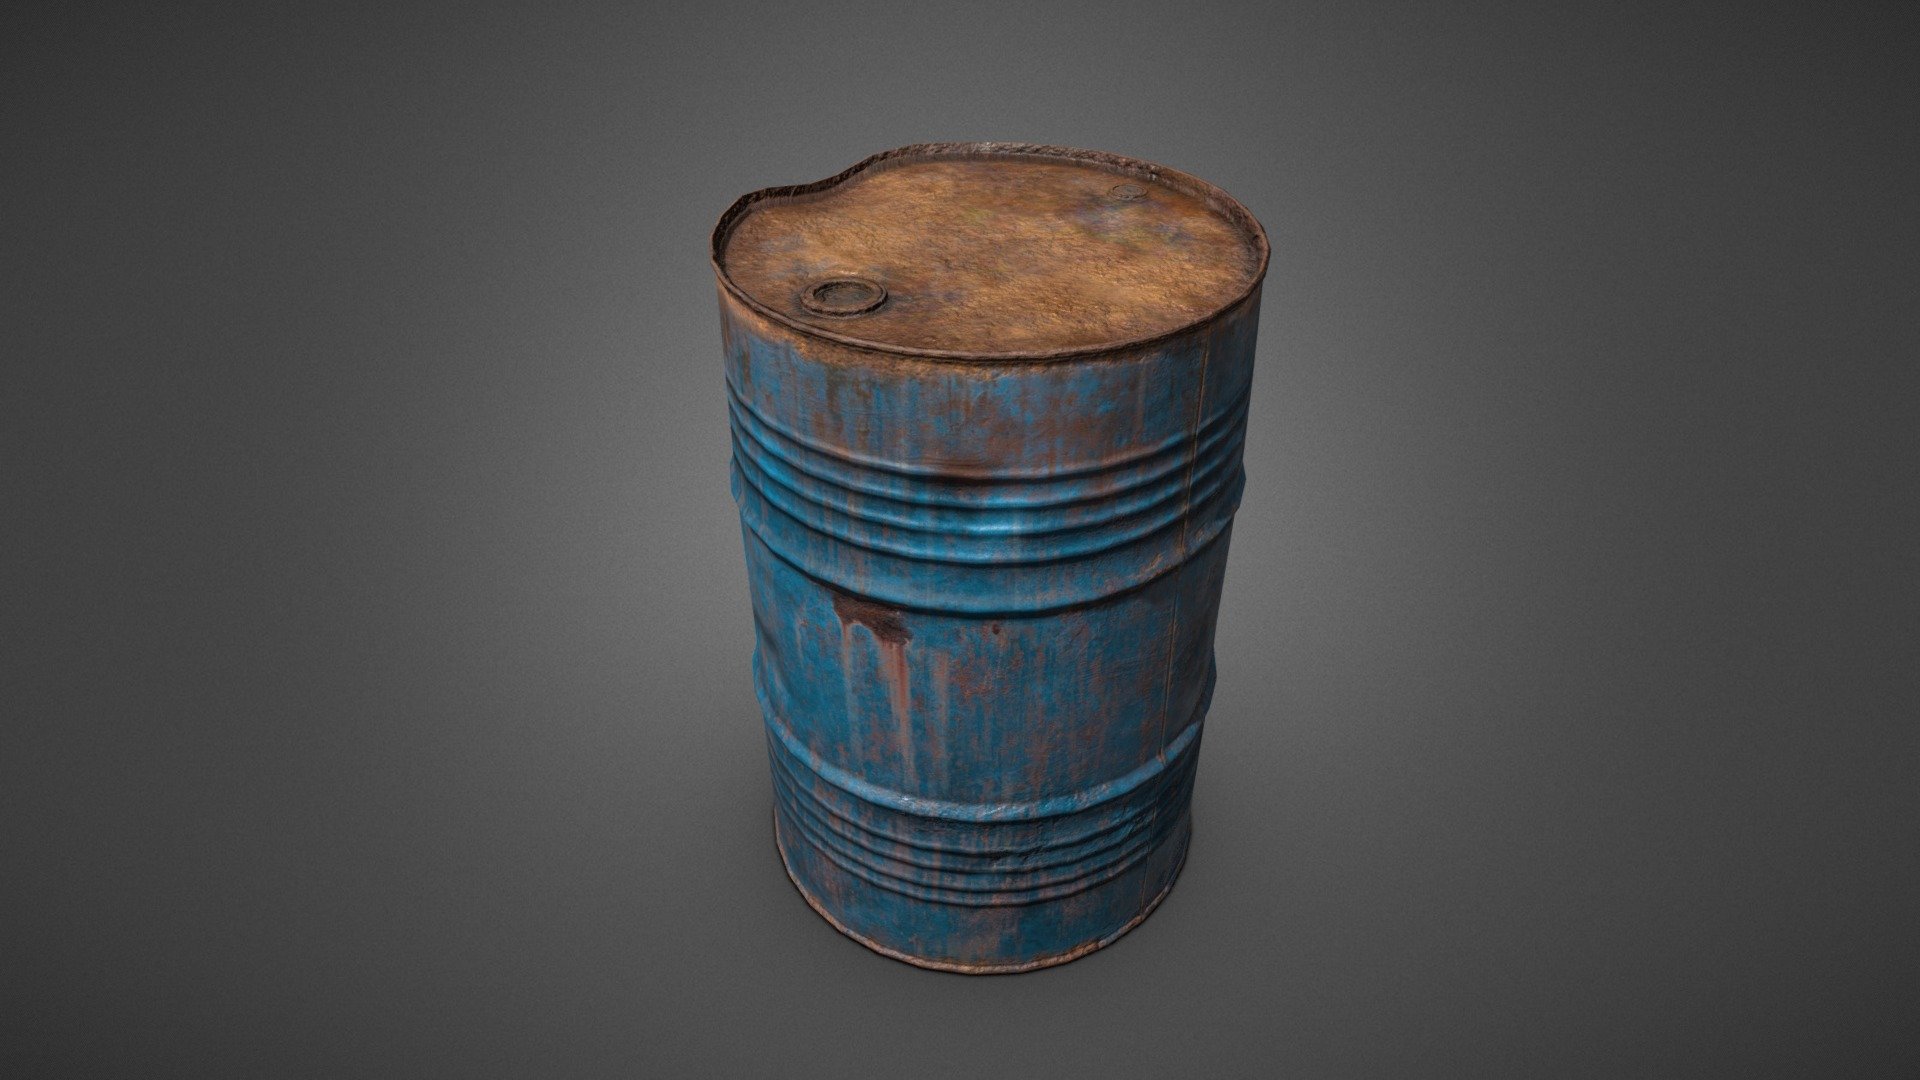 Low poly, game-ready model of a rusted metal barrel

TEXTURES

High resolution PBR Metal/Roughness textures are provided in the additional files.

Texture size: 2048 x 2048
Texture format: PNG 8 bit (uncompressed)




Base Color (Diffuse)

Metallic

Roughness

Height

Normal 

Ambient Occlusion

This asset is part of our Hangar collection - Rusty Barrel Metal - Buy Royalty Free 3D model by Ringtail Studios (@ringtail) 3d model